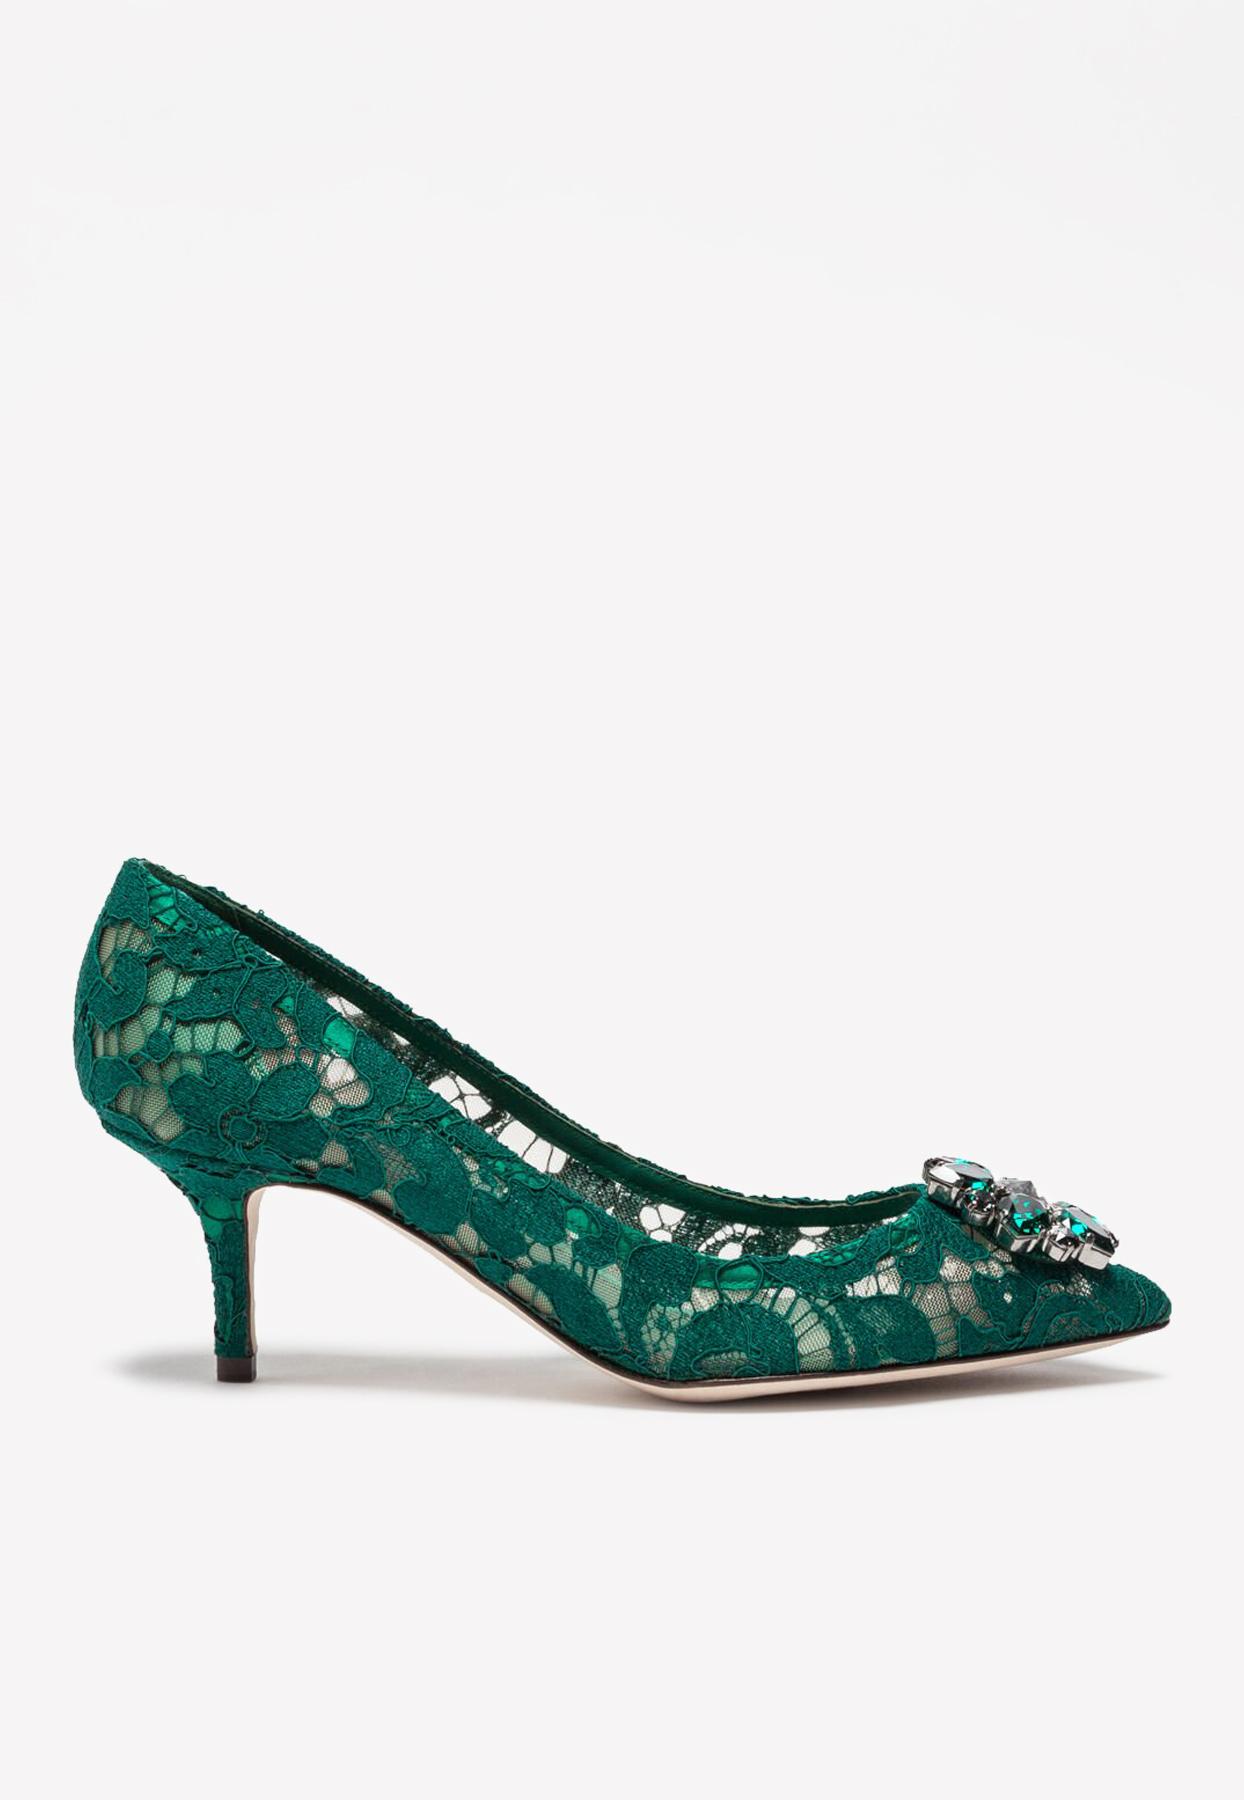 Dolce & Gabbana Lace Rainbow Pumps With Brooch Detailing | Lyst